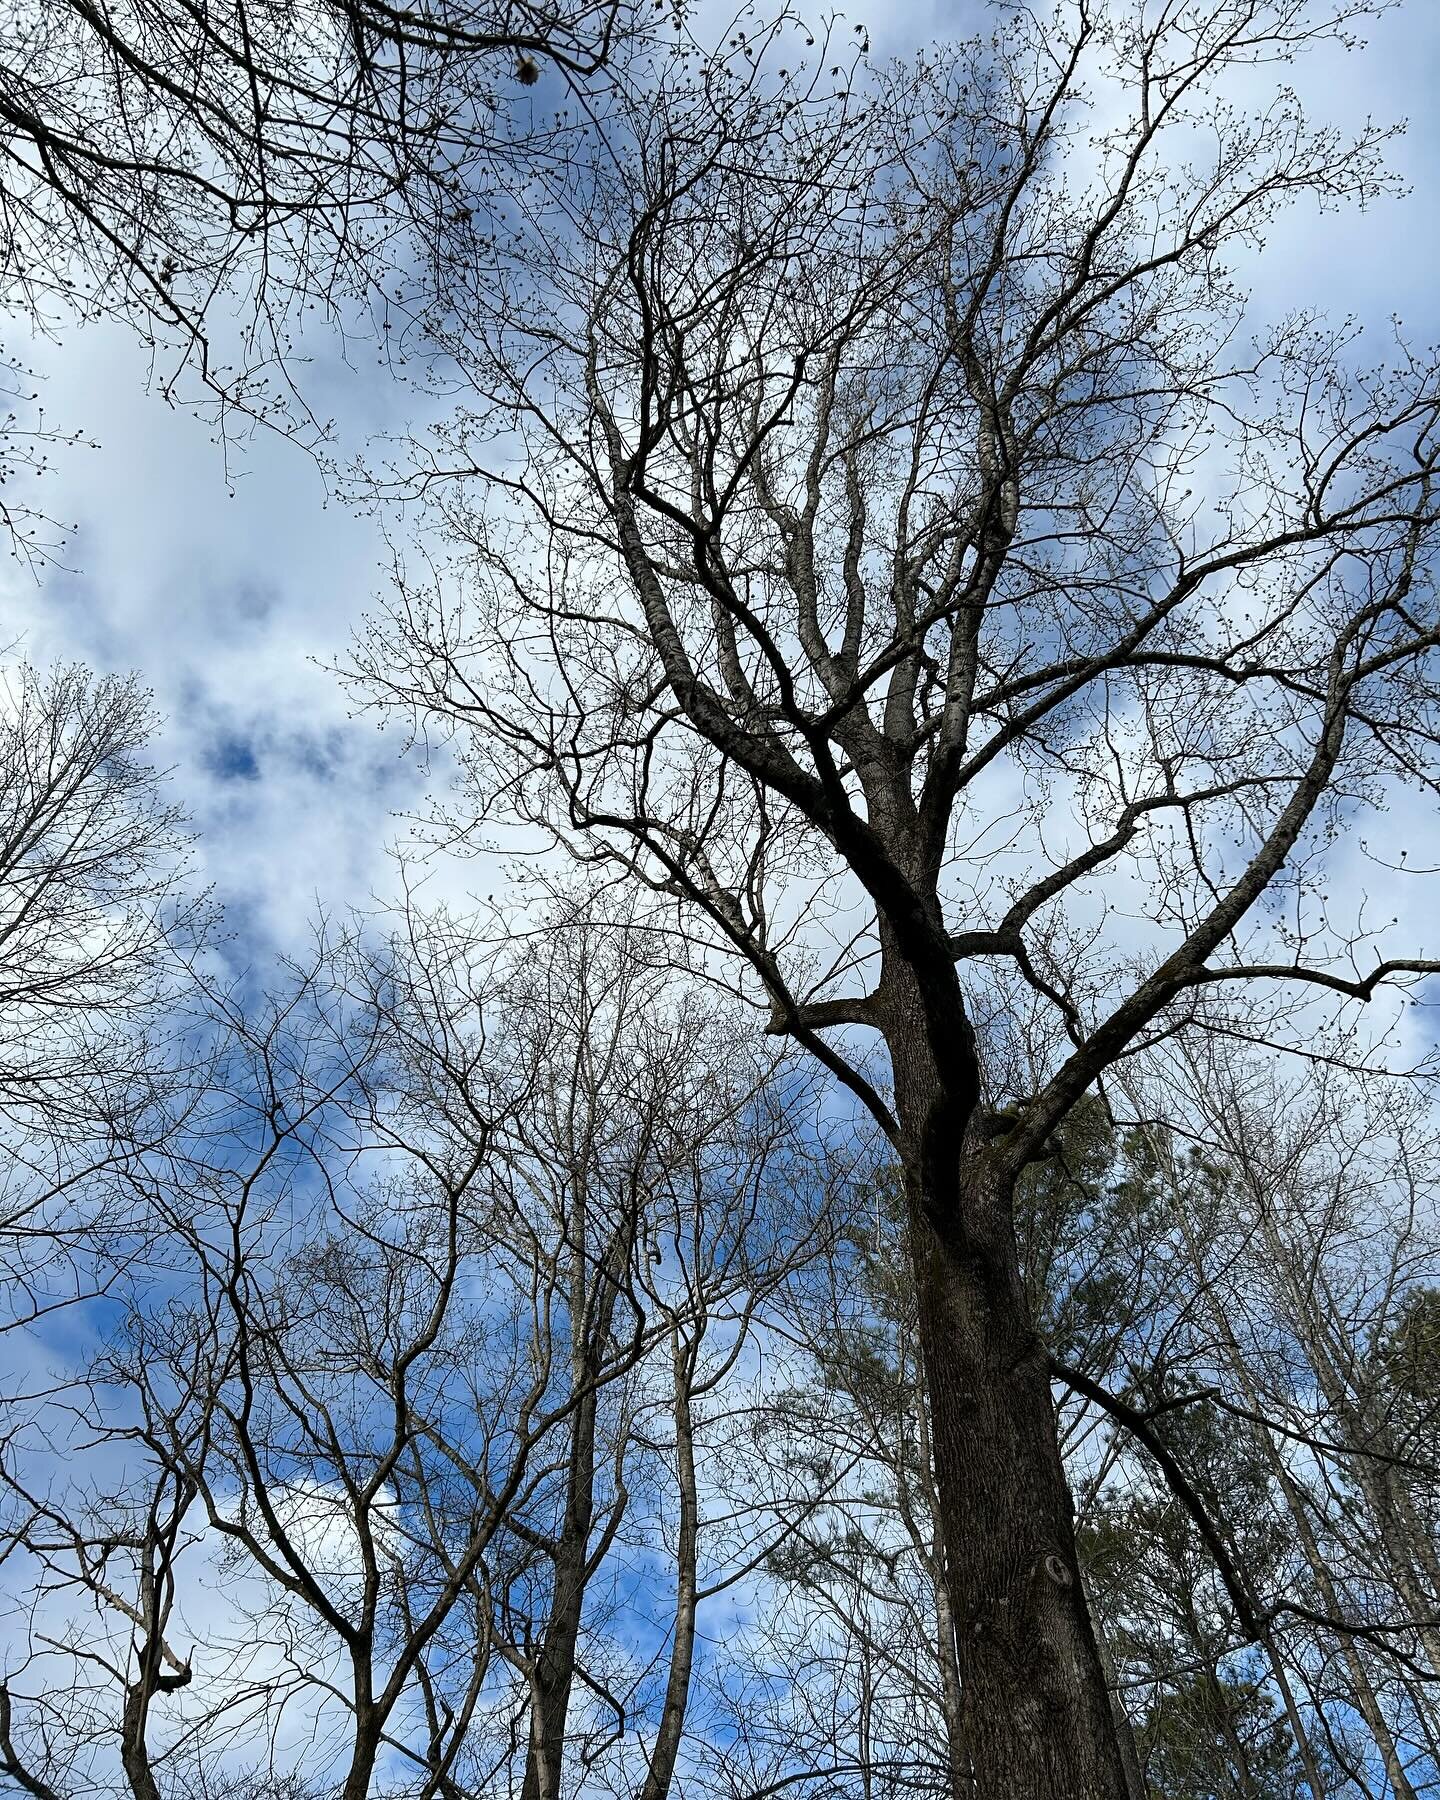 Bare trees silhouetted against a blue sky? #winterbeauty